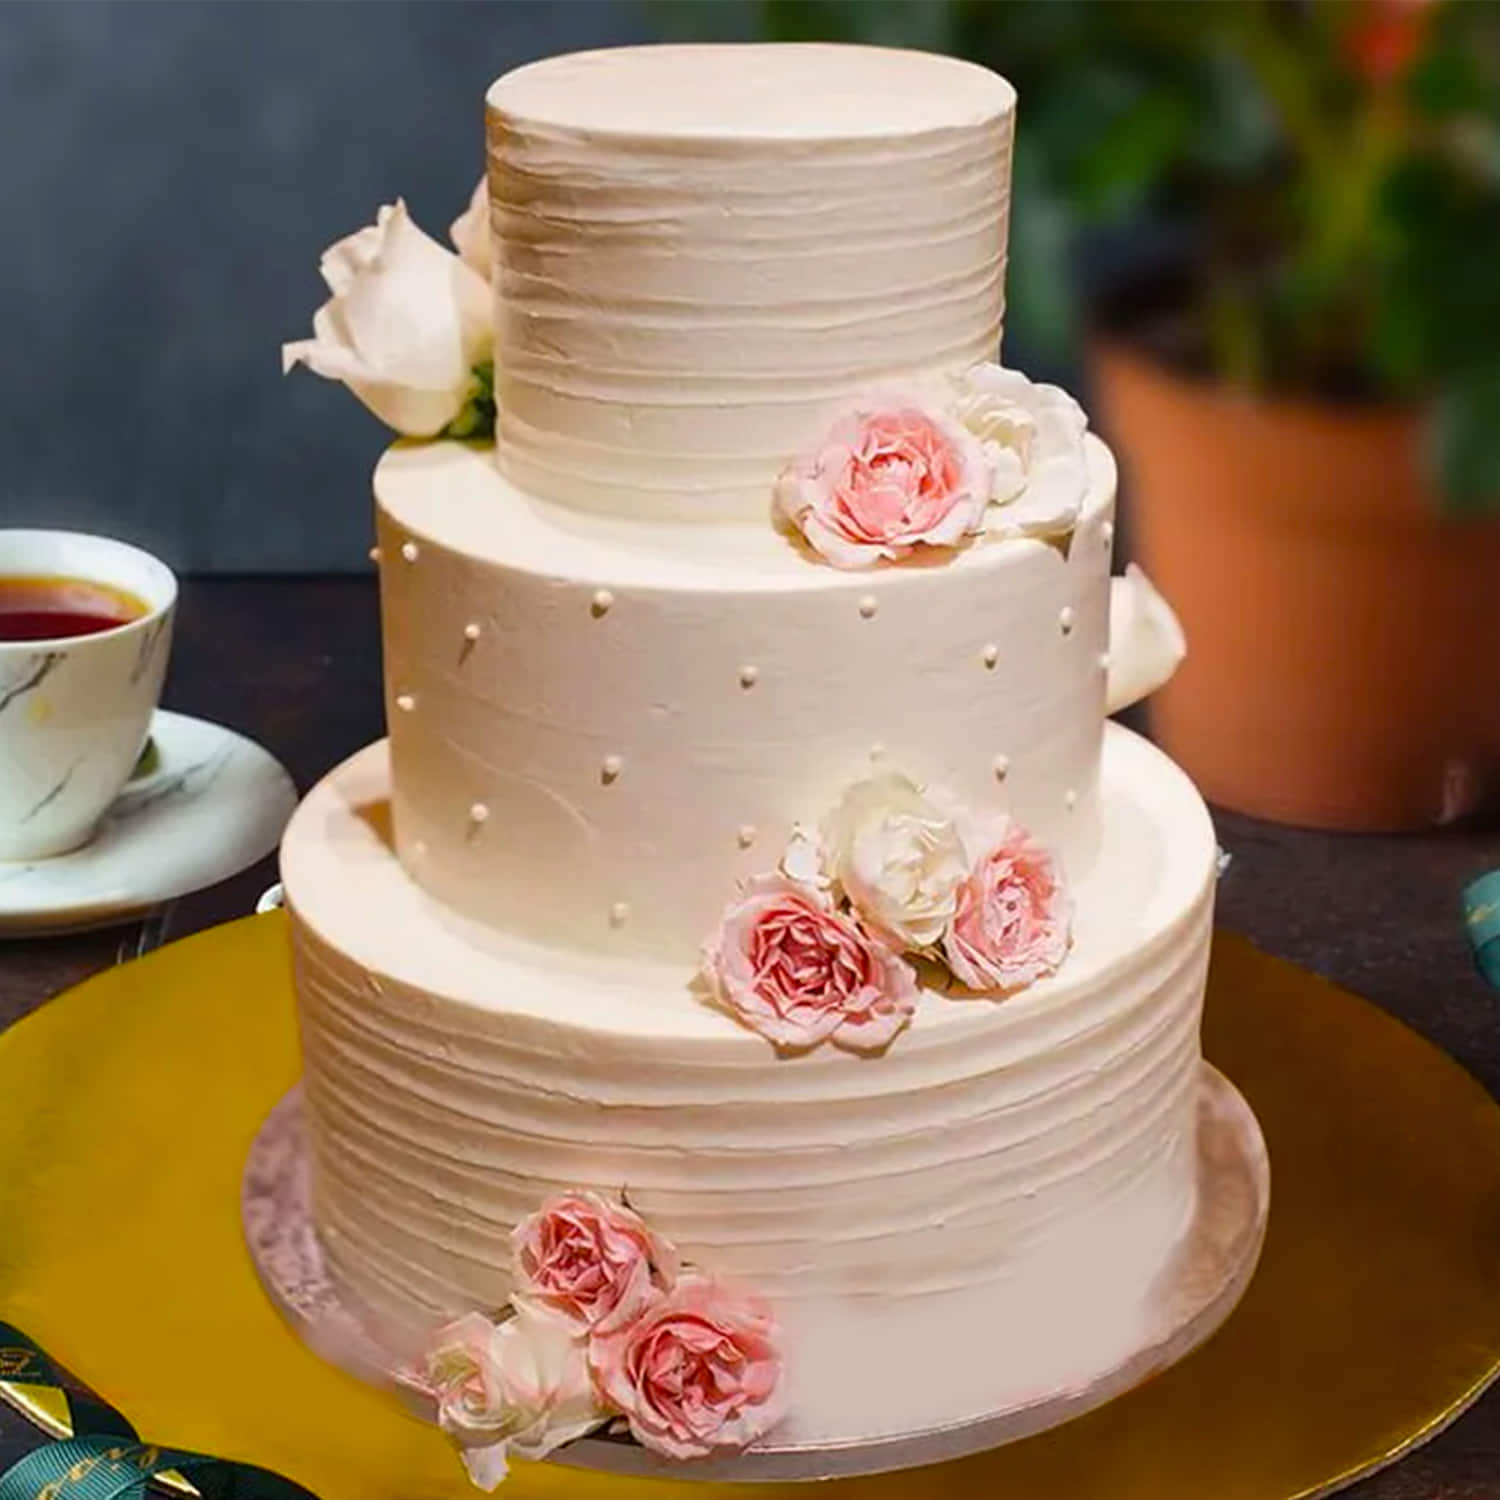 Trending Cake Toppers Designs To Make Your Wedding Day Special